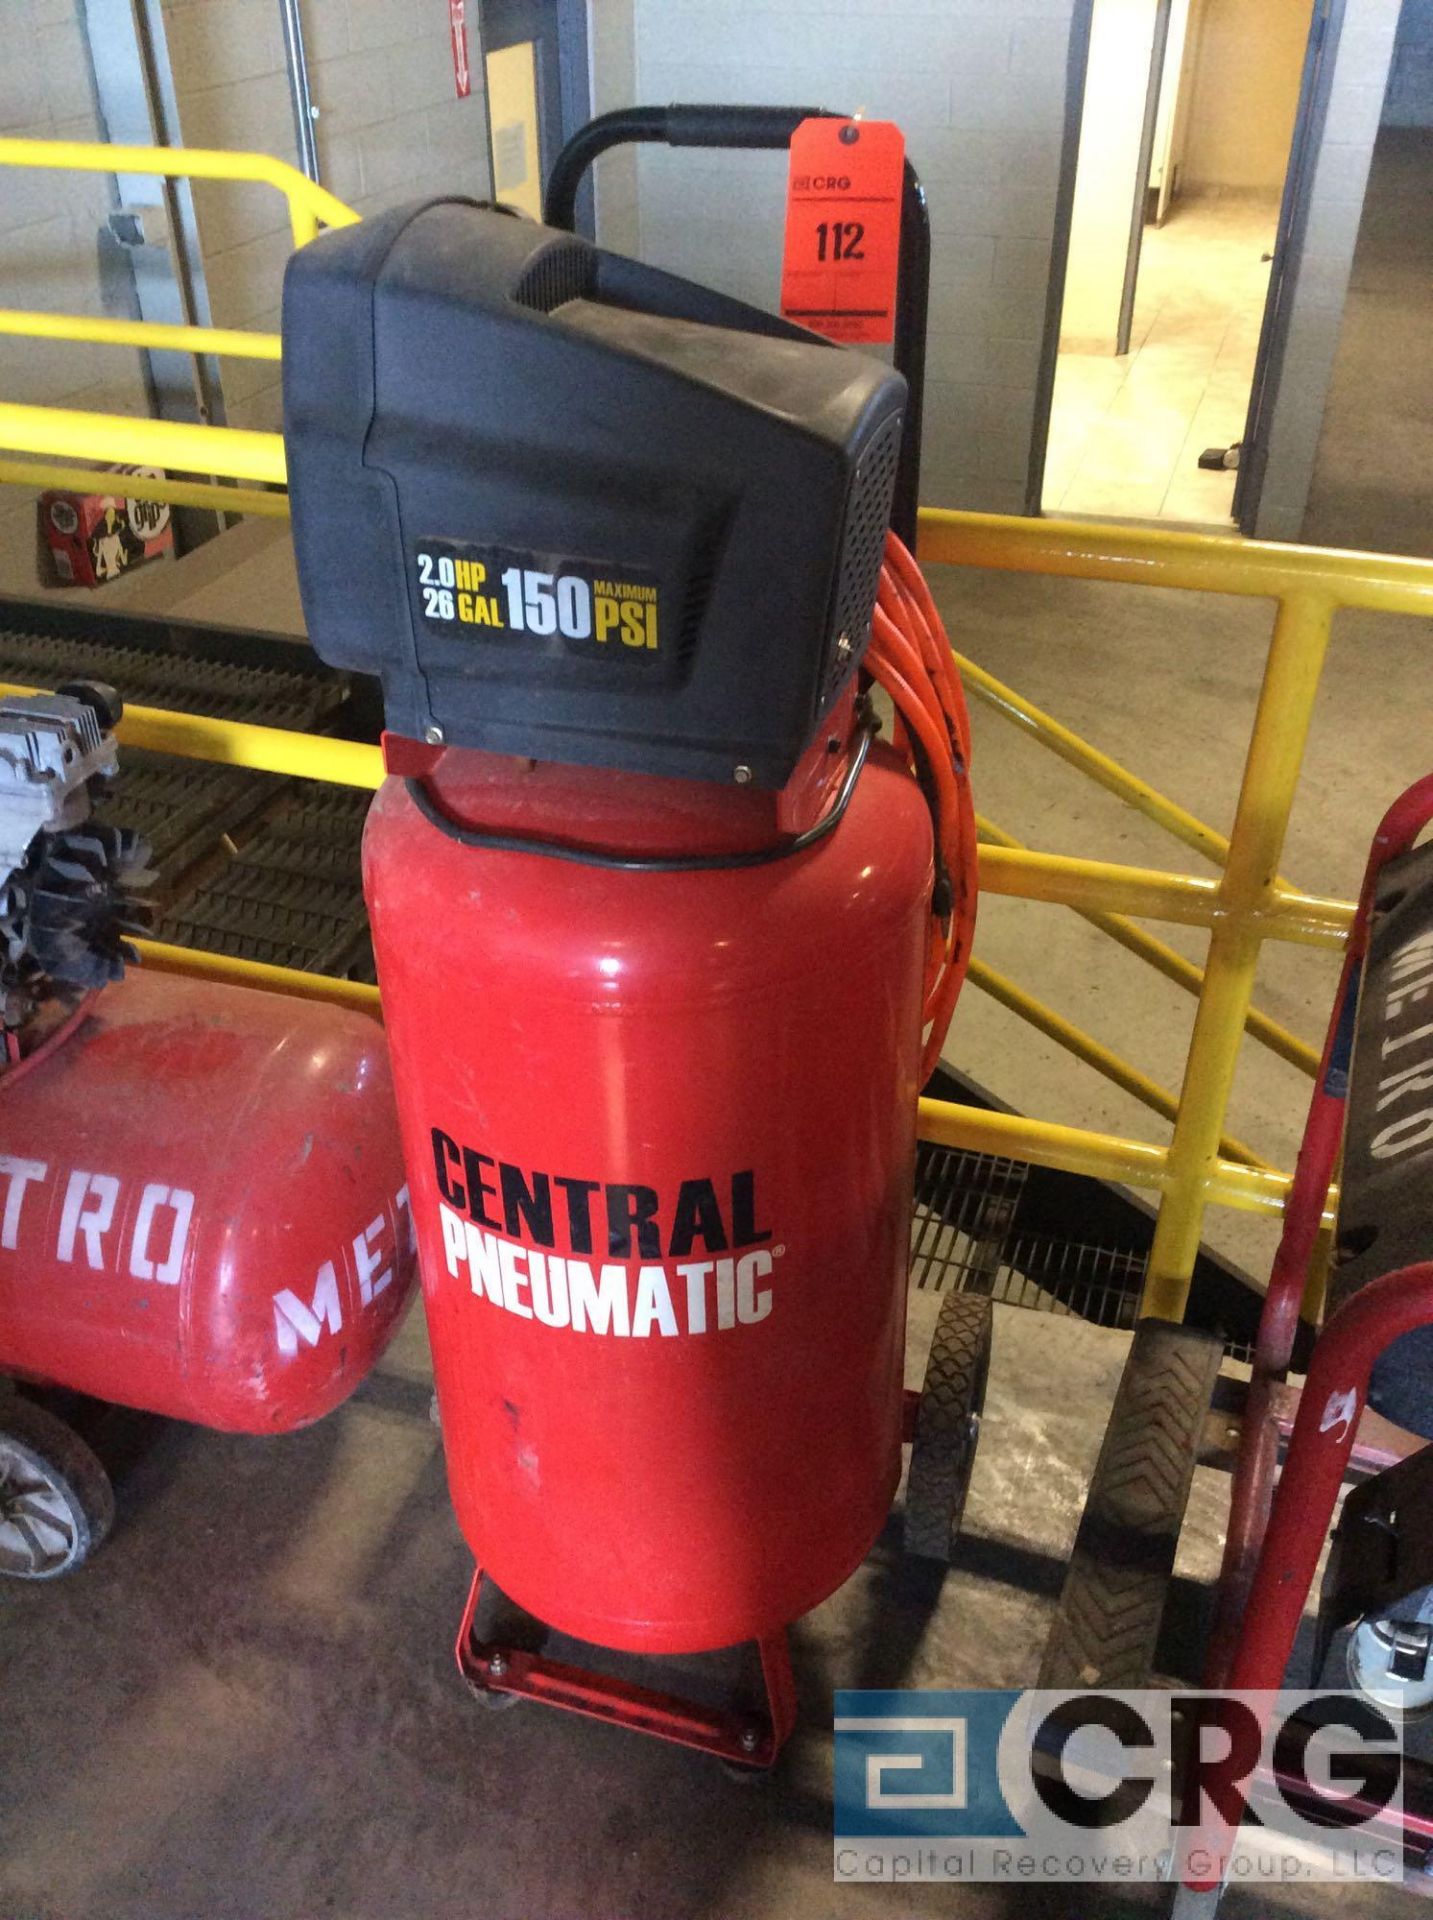 General Pneumatic portable air compressor, 150 psi, 2 hp (LOCATED INDUSTRIAL COURT INSIDE)